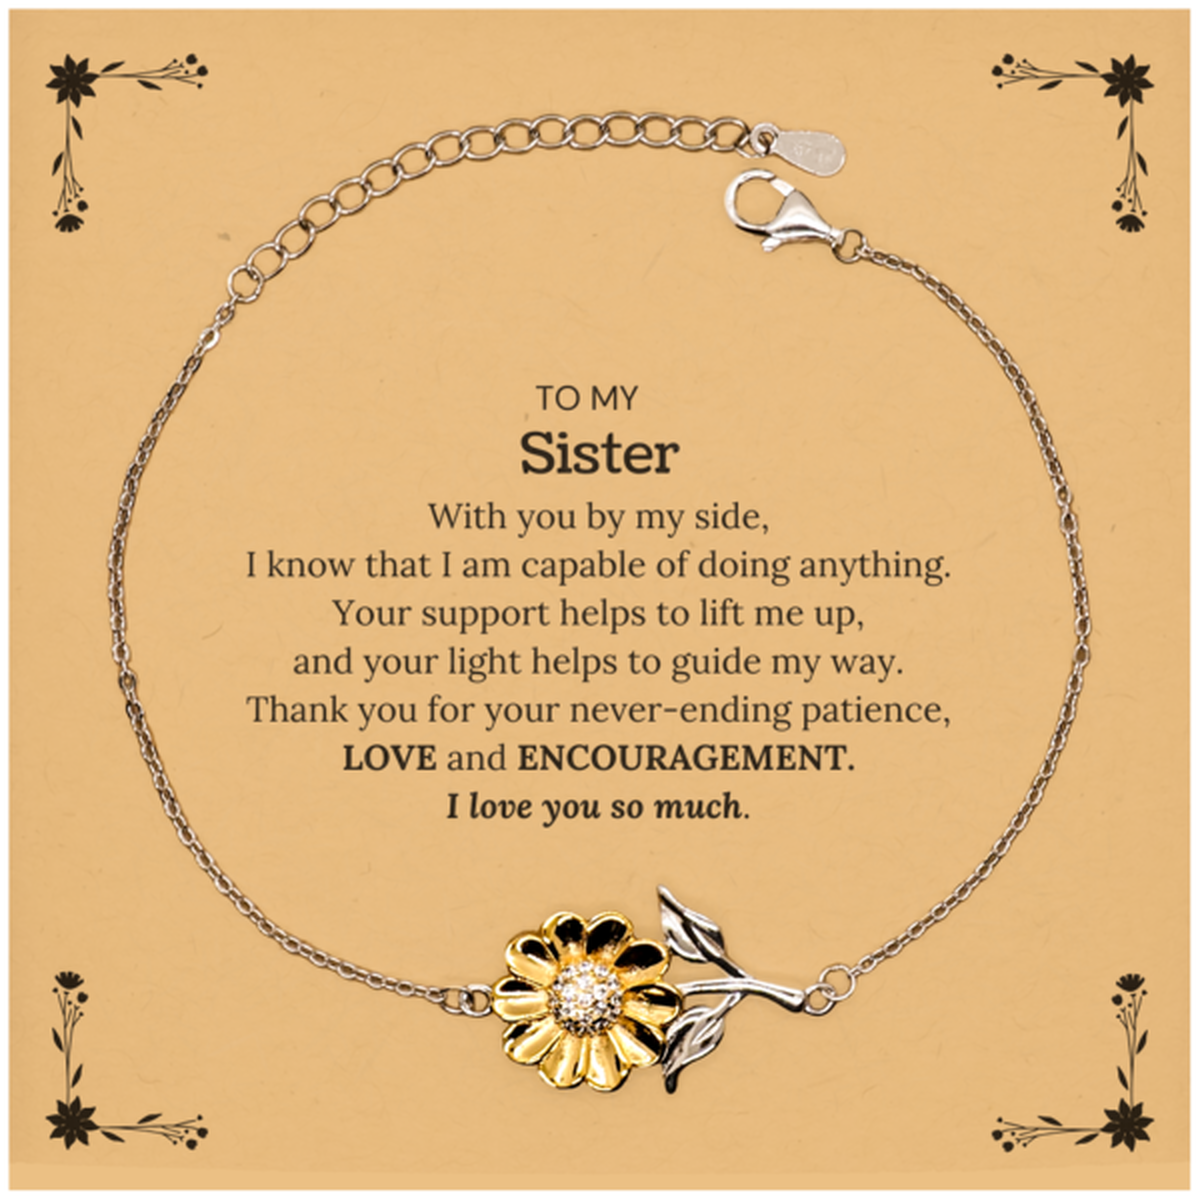 Appreciation Sister Sunflower Bracelet Gifts, To My Sister Birthday Christmas Wedding Keepsake Gifts for Sister With you by my side, I know that I am capable of doing anything. I love you so much